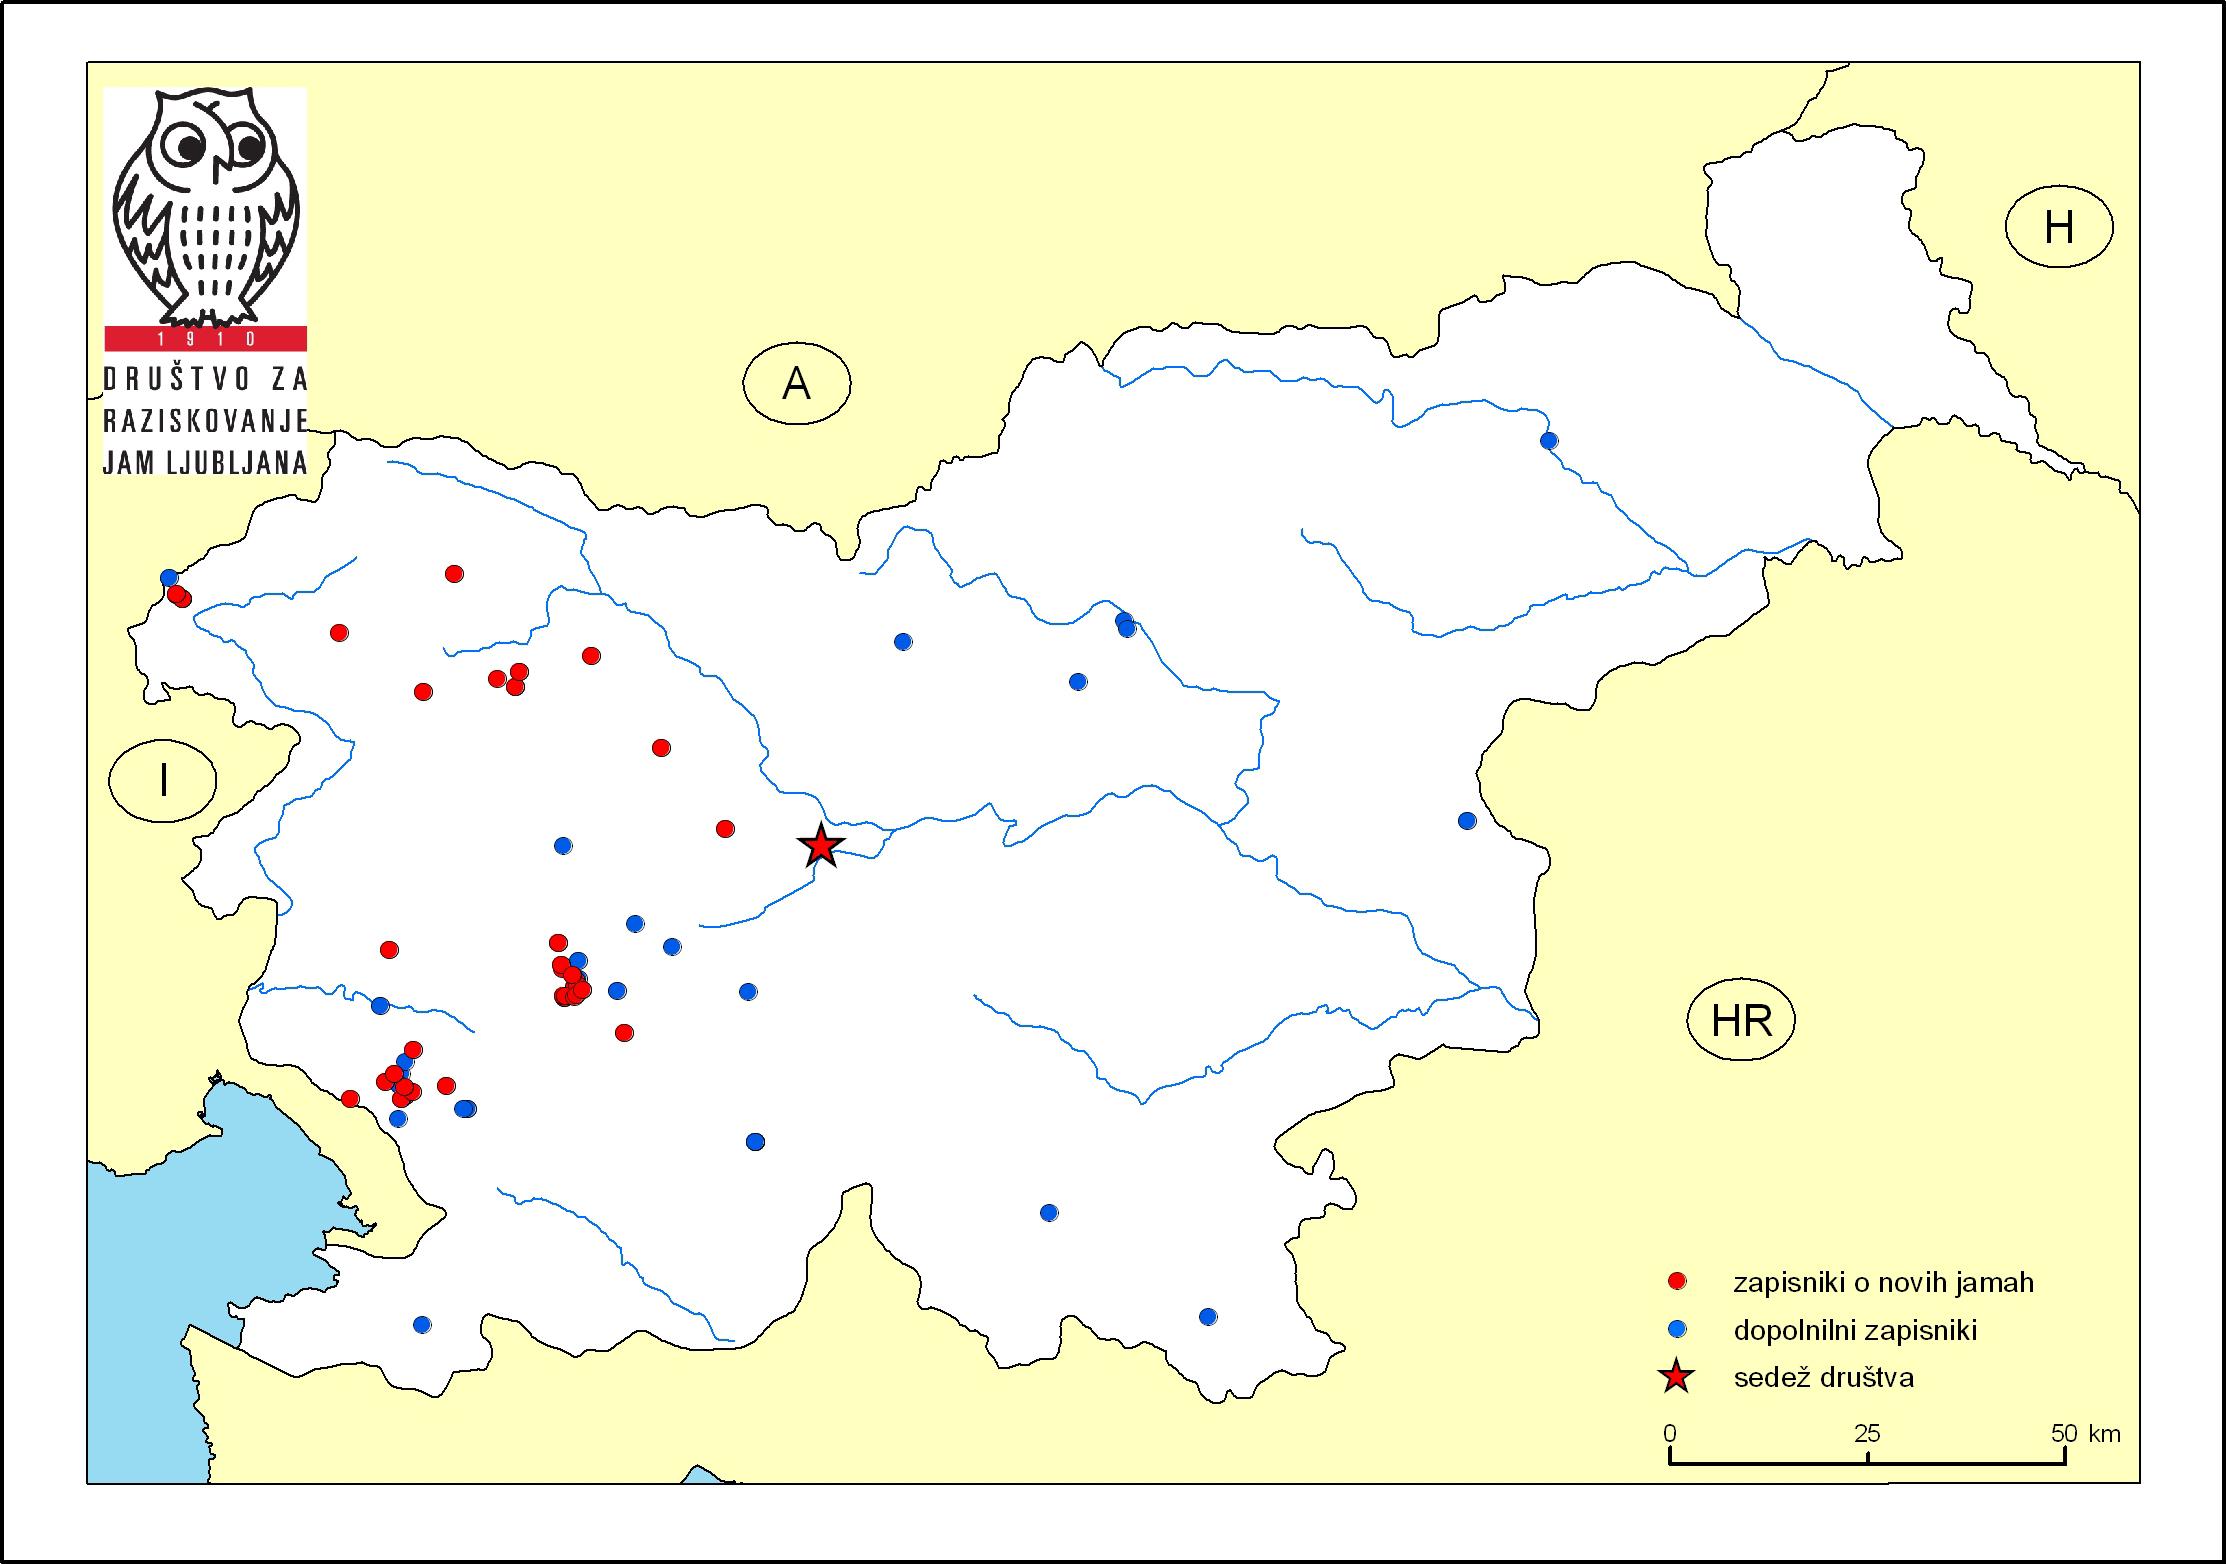 Map locations of new caves for which data records were entered in 2011 or known caves for which data records were updated in 2011.